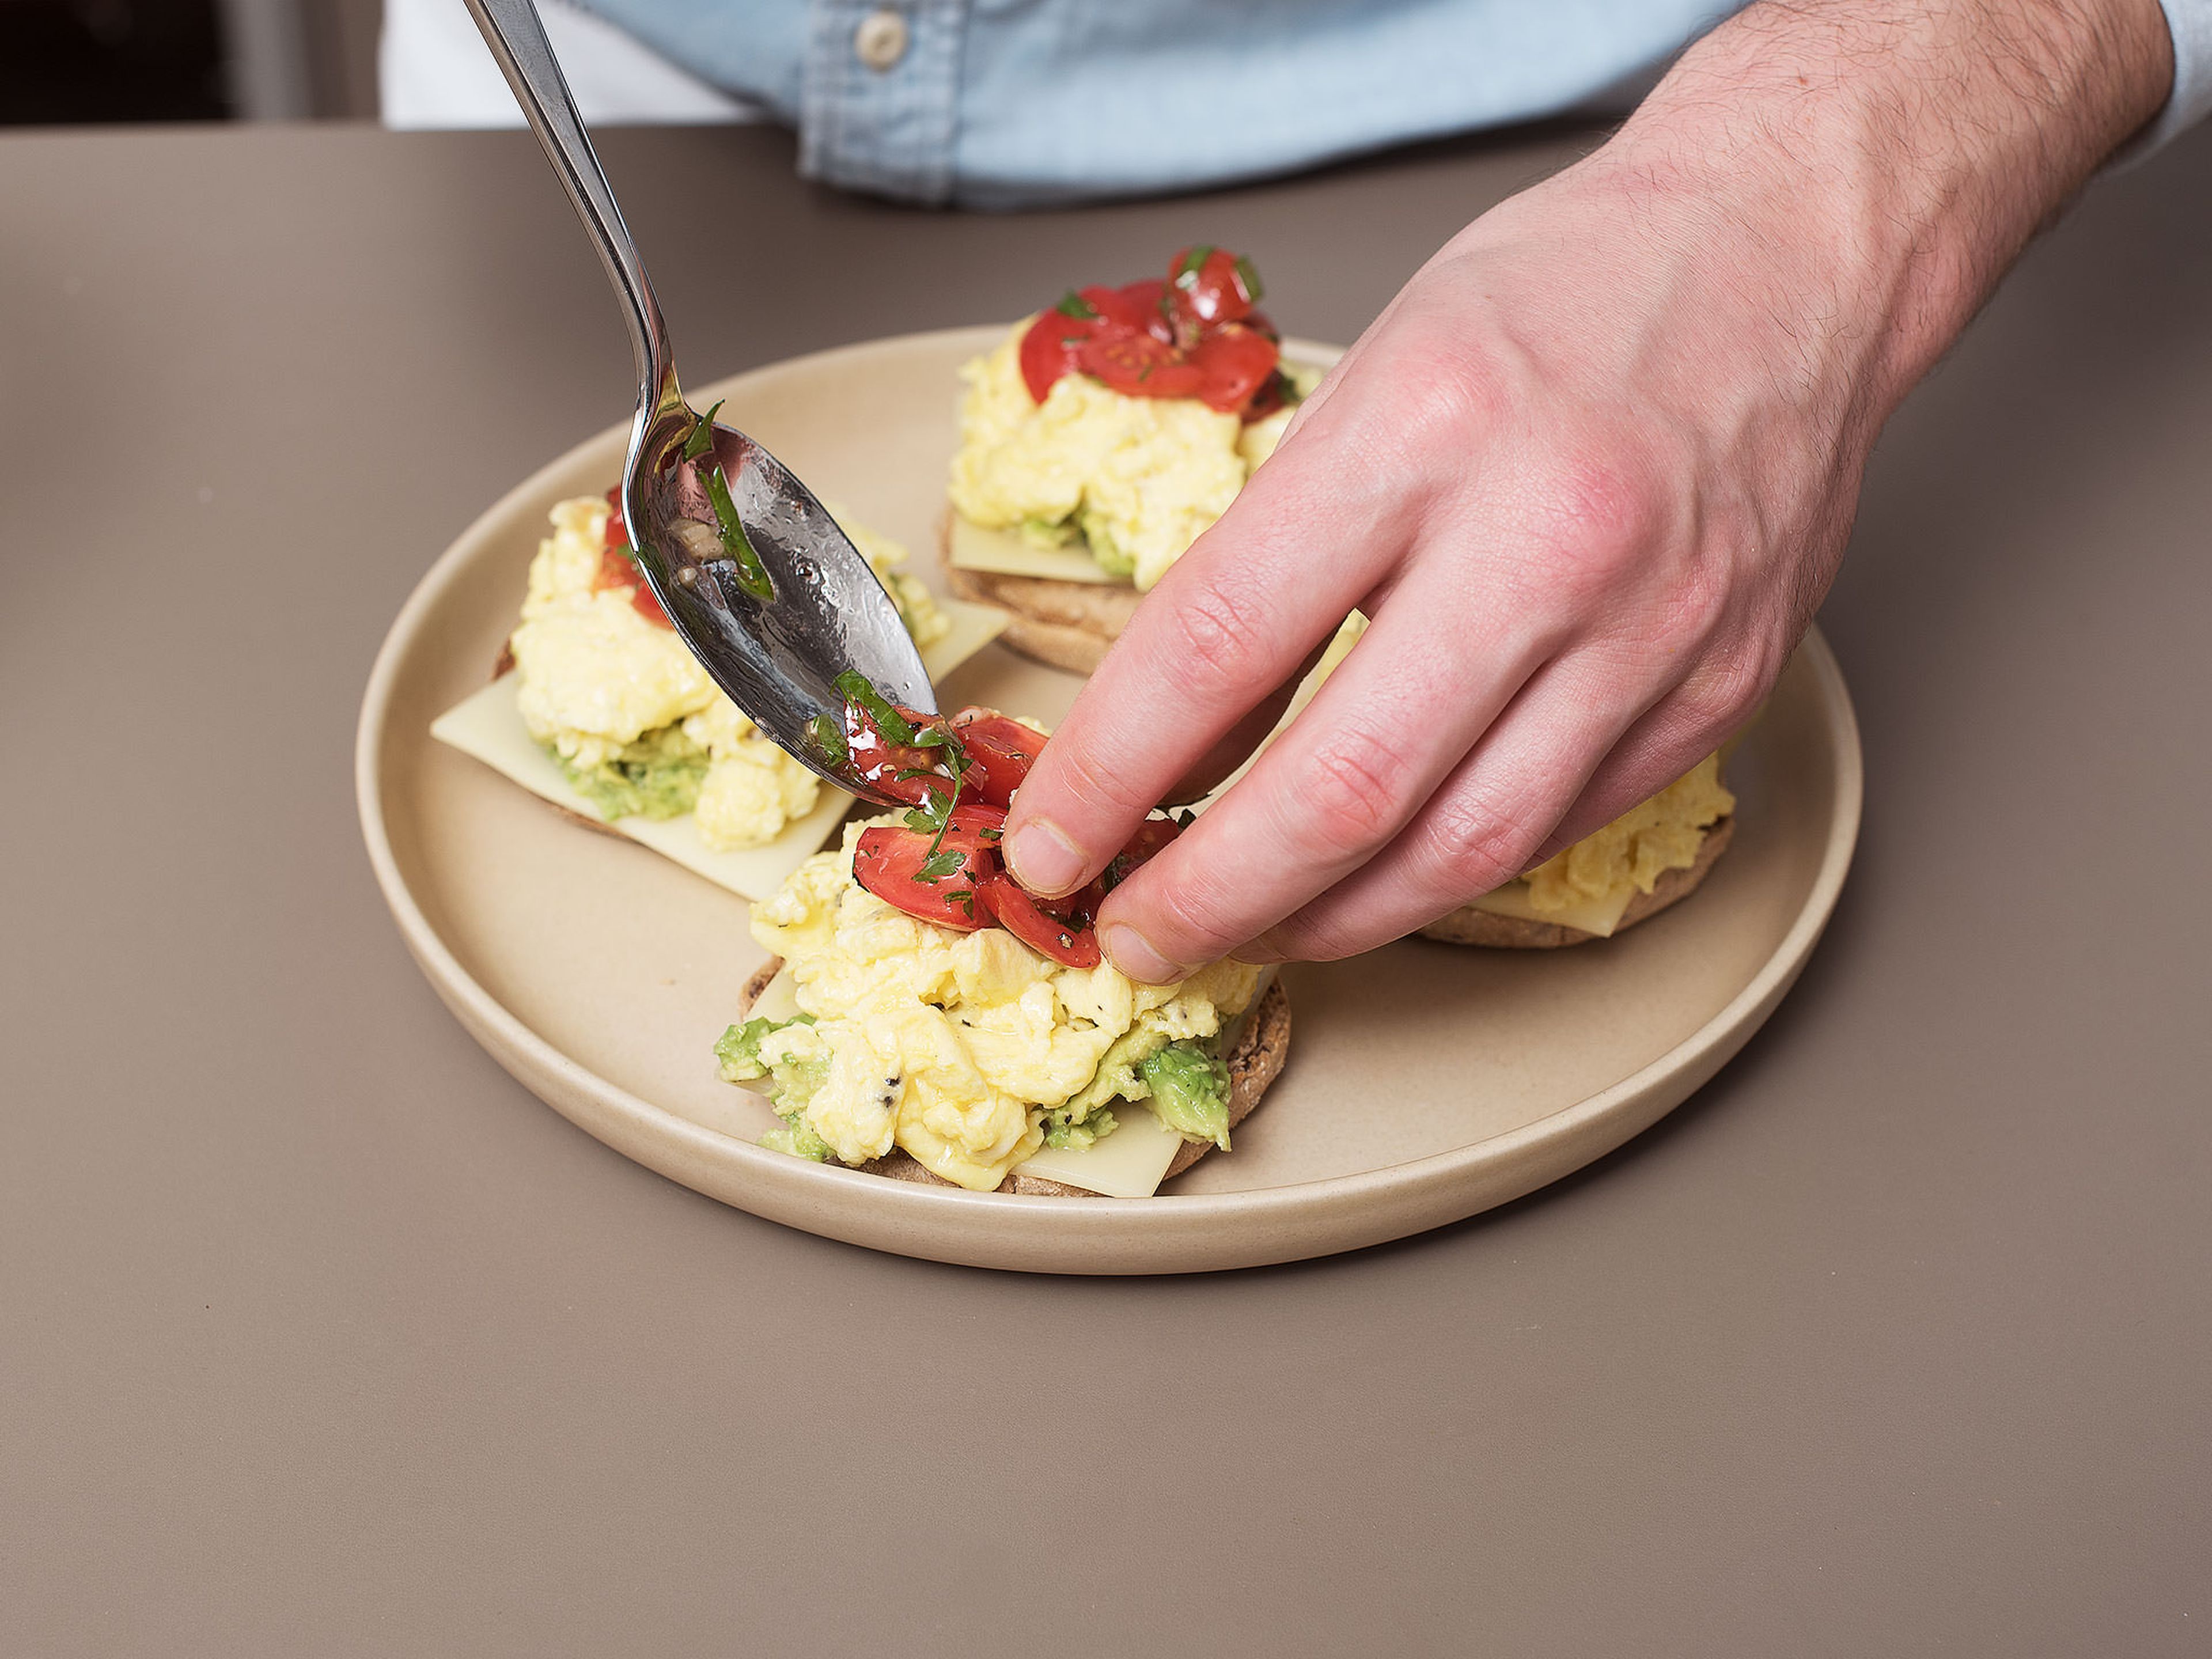 Top each halved English muffin with a slice of Alpine cheese, some avocado, scrambled eggs and salsa. Enjoy!